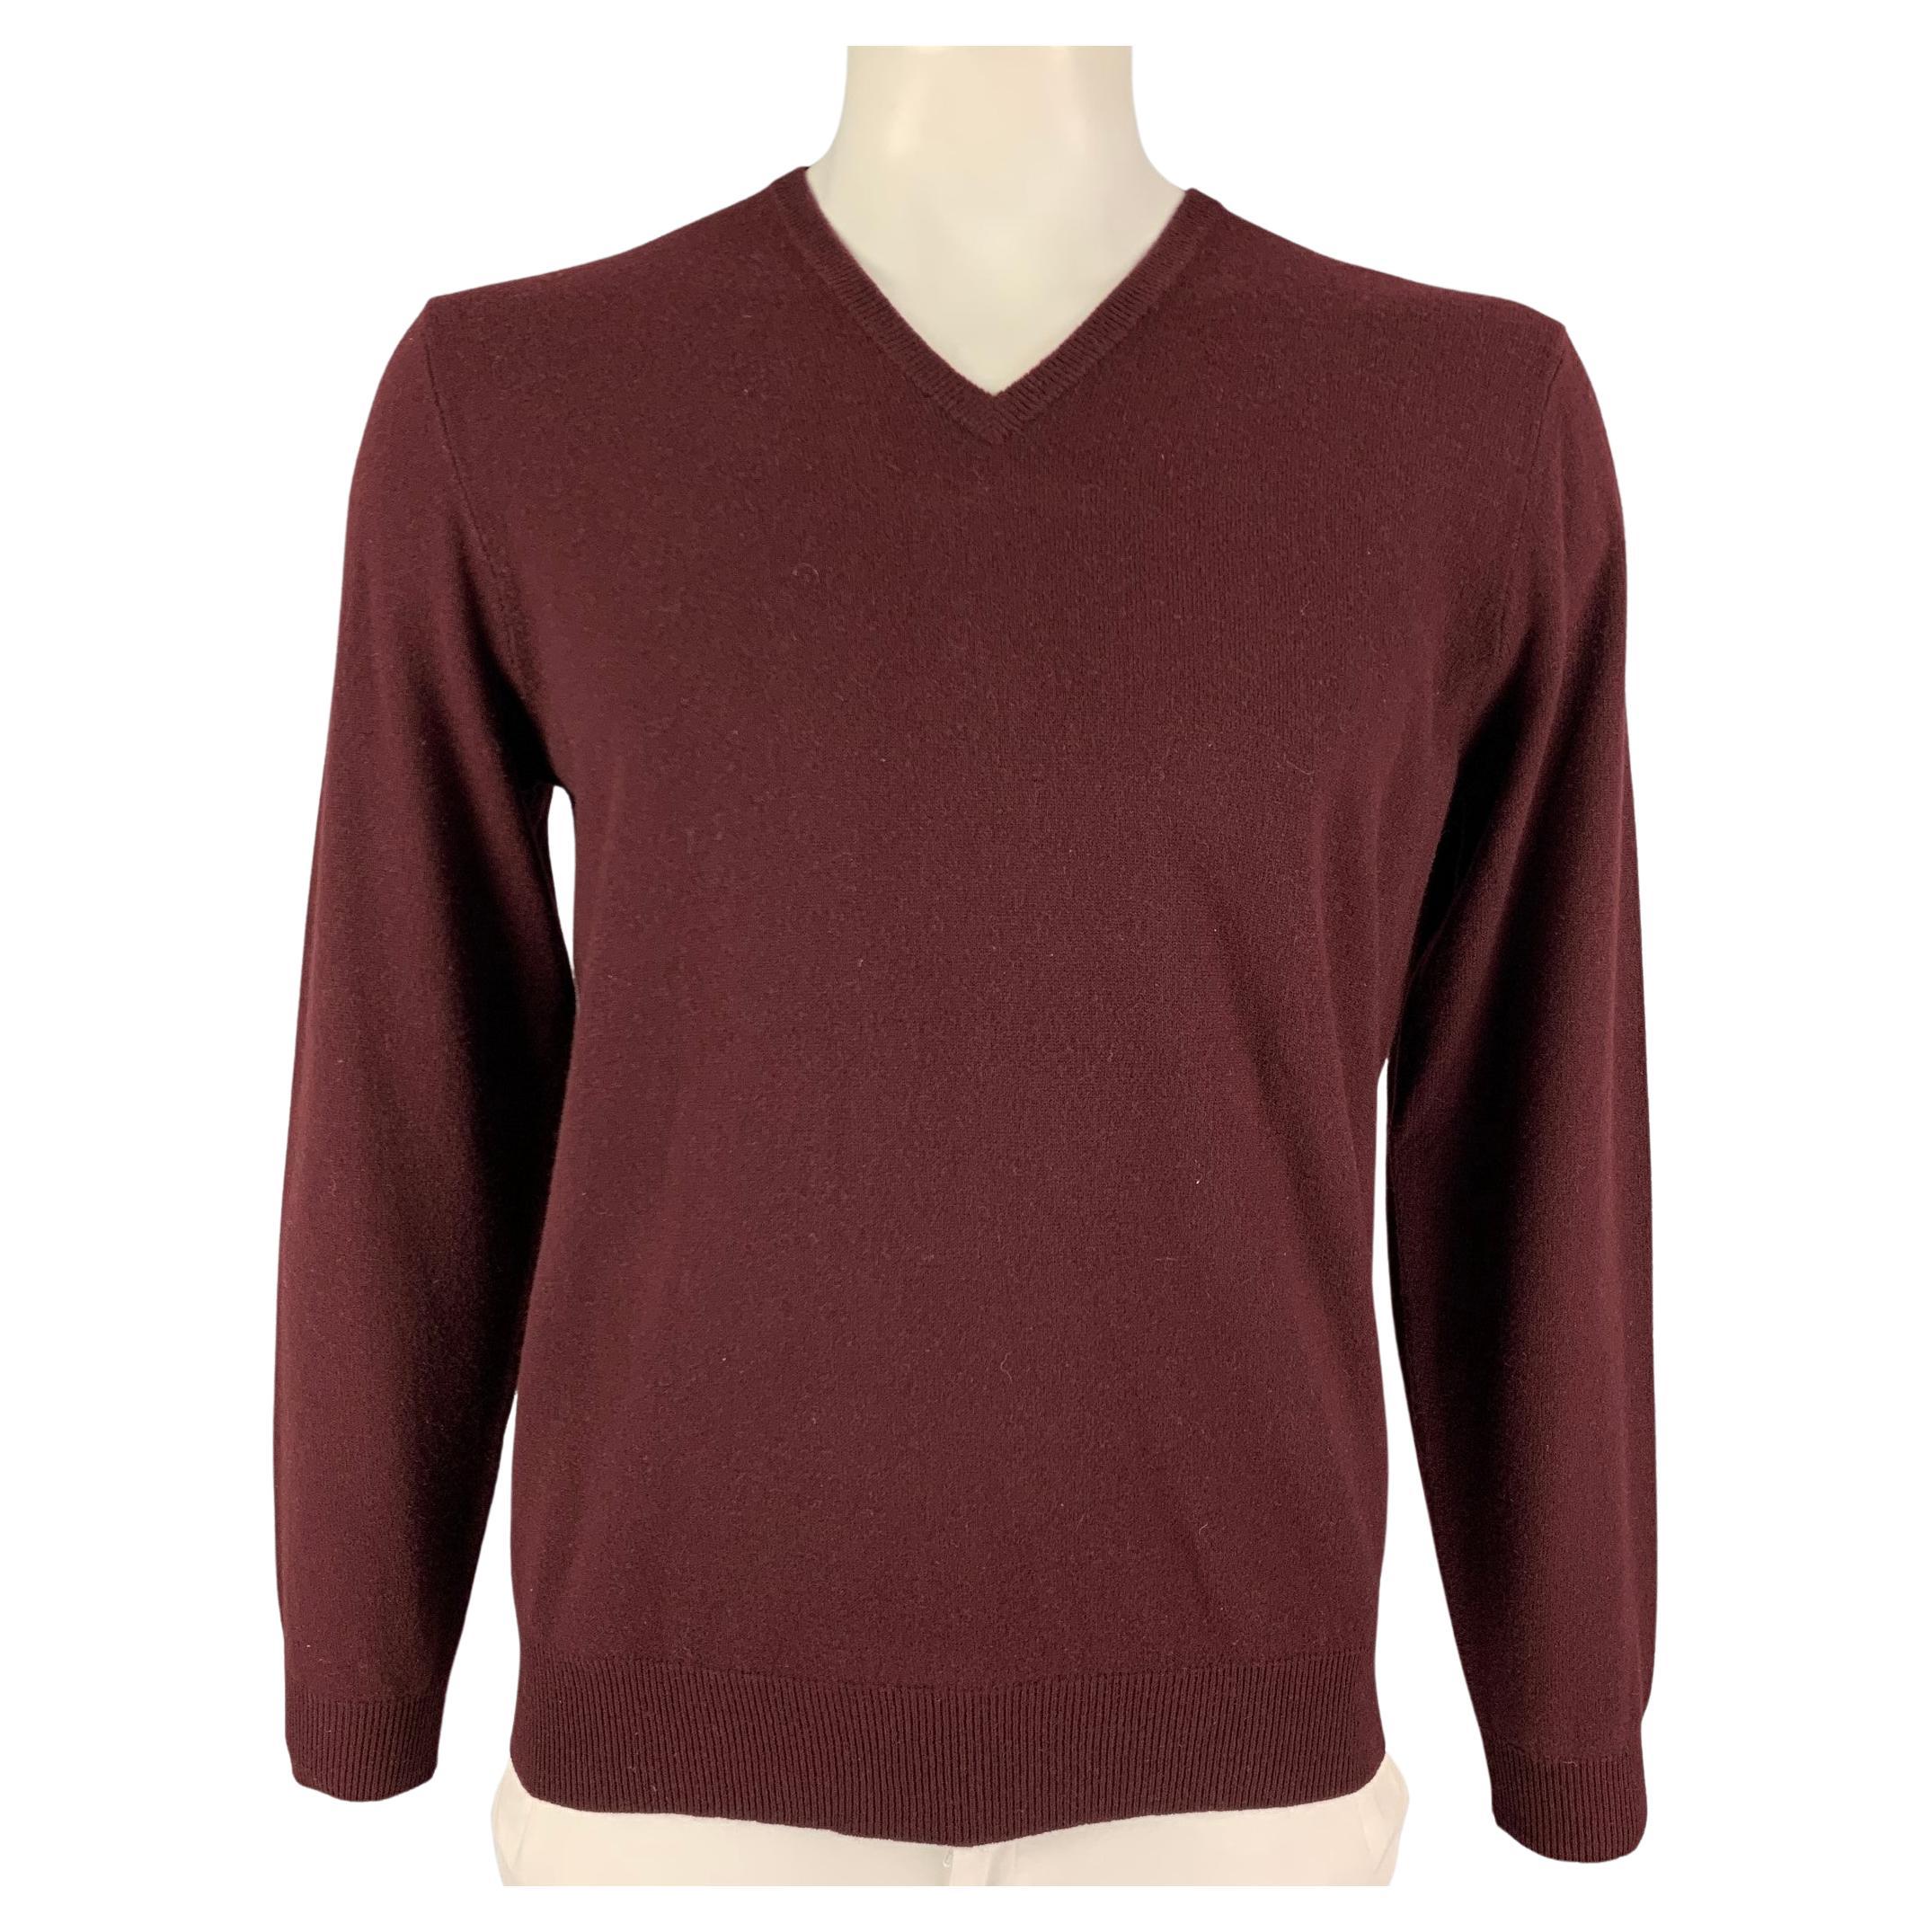 POLO by RALPH LAUREN Size L Burgundy Cashmere V-Neck Sweater